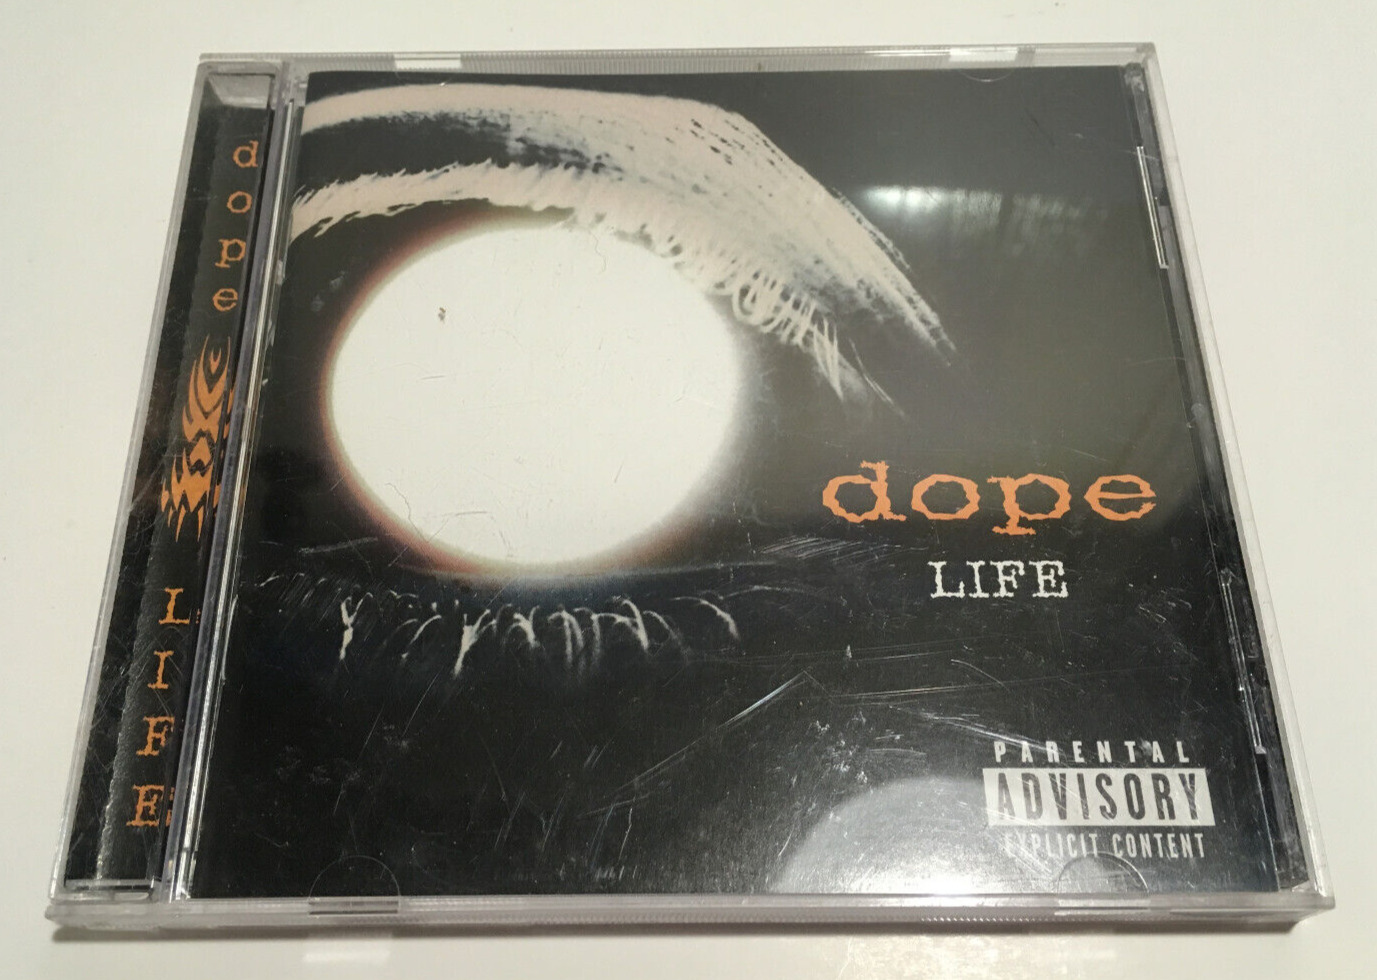 Life by Dope (CD, 2001, Epic)